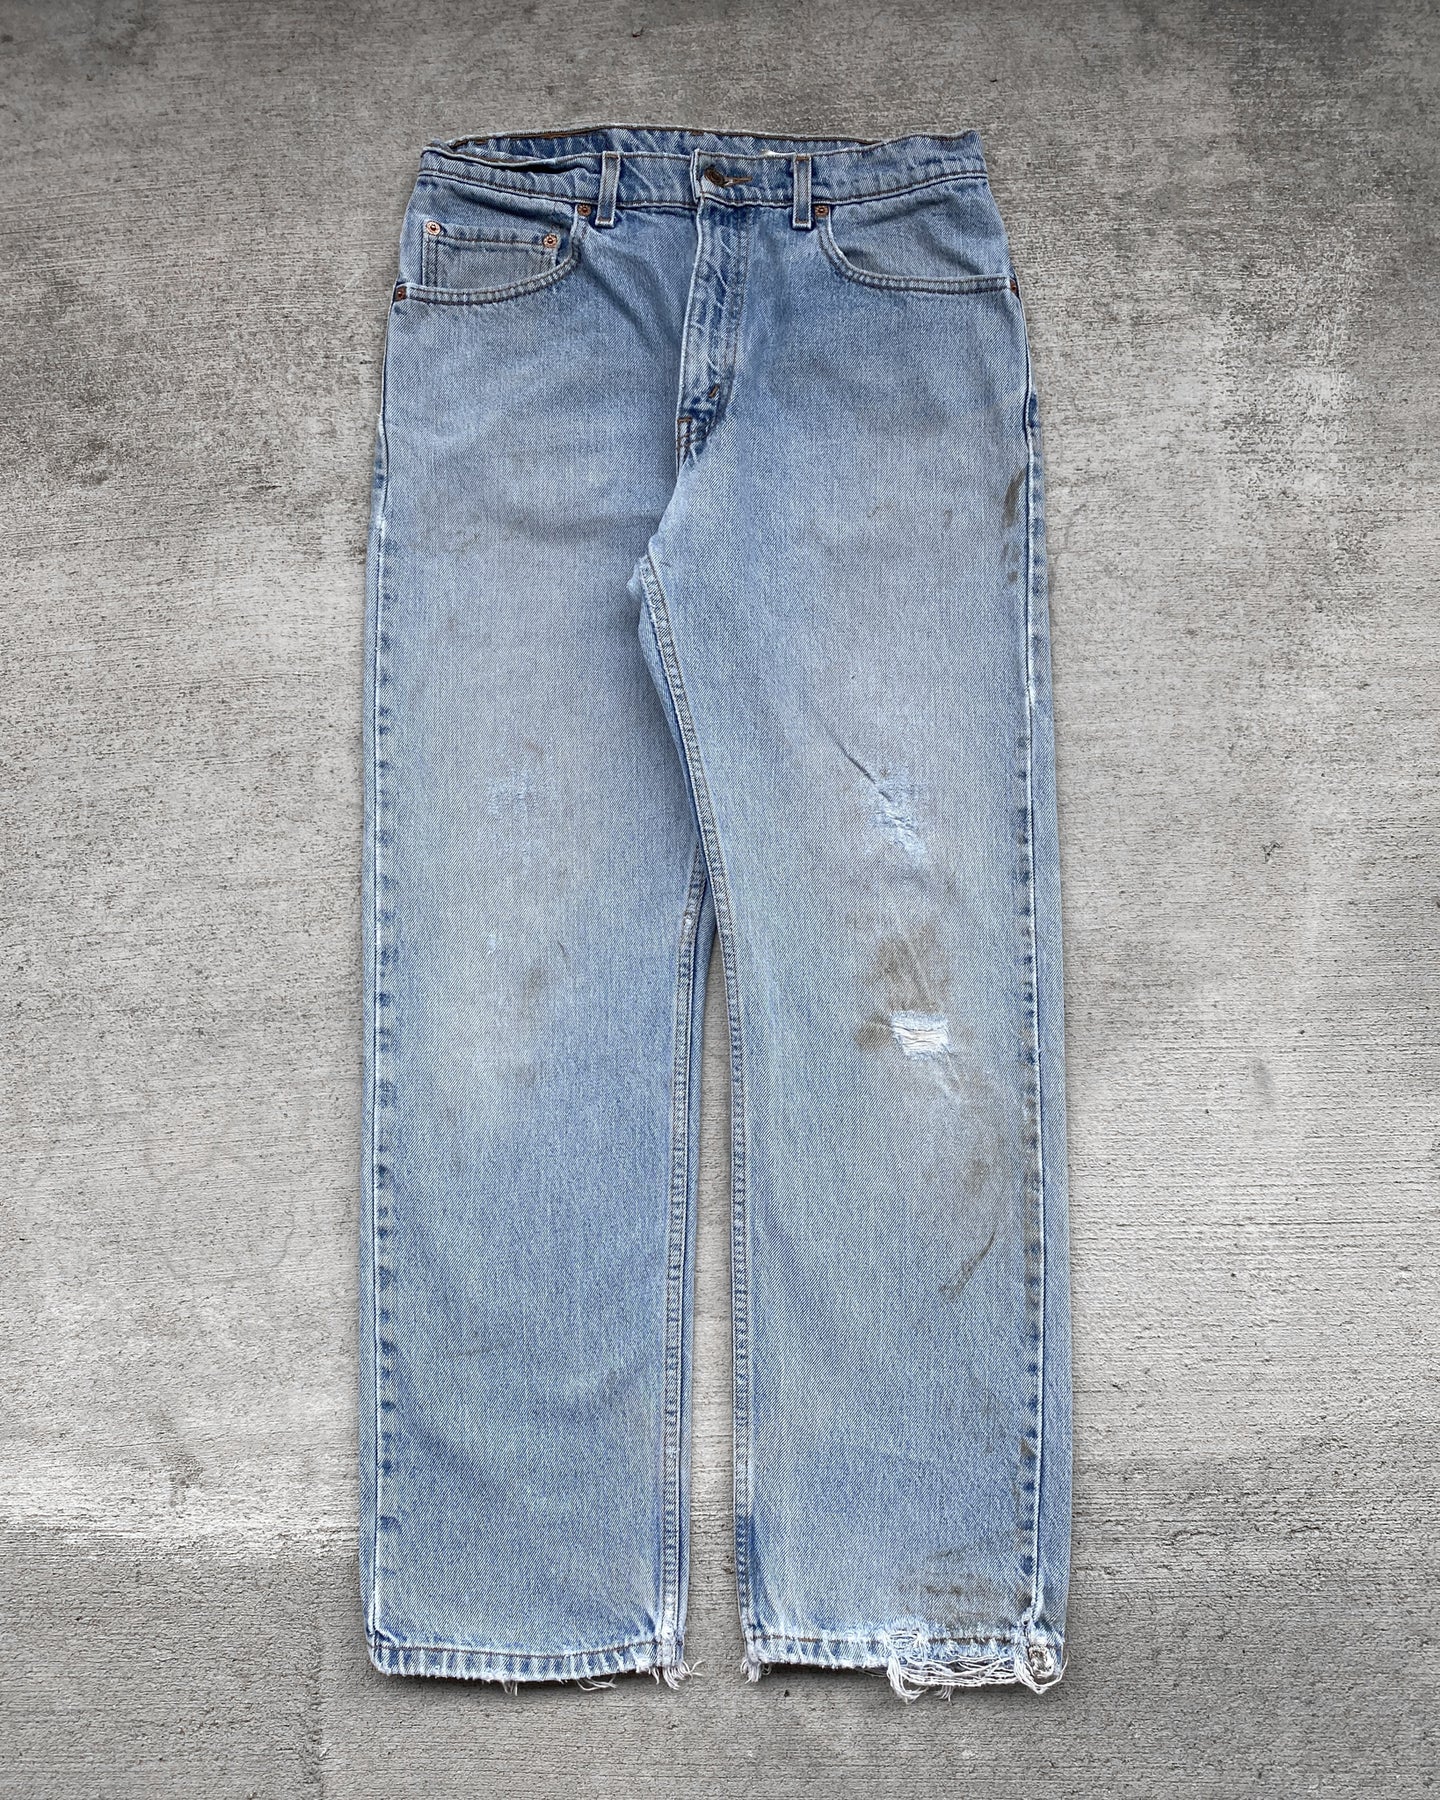 1990s Levi's Dirt Wash and Distressed 505 - 31 x 30